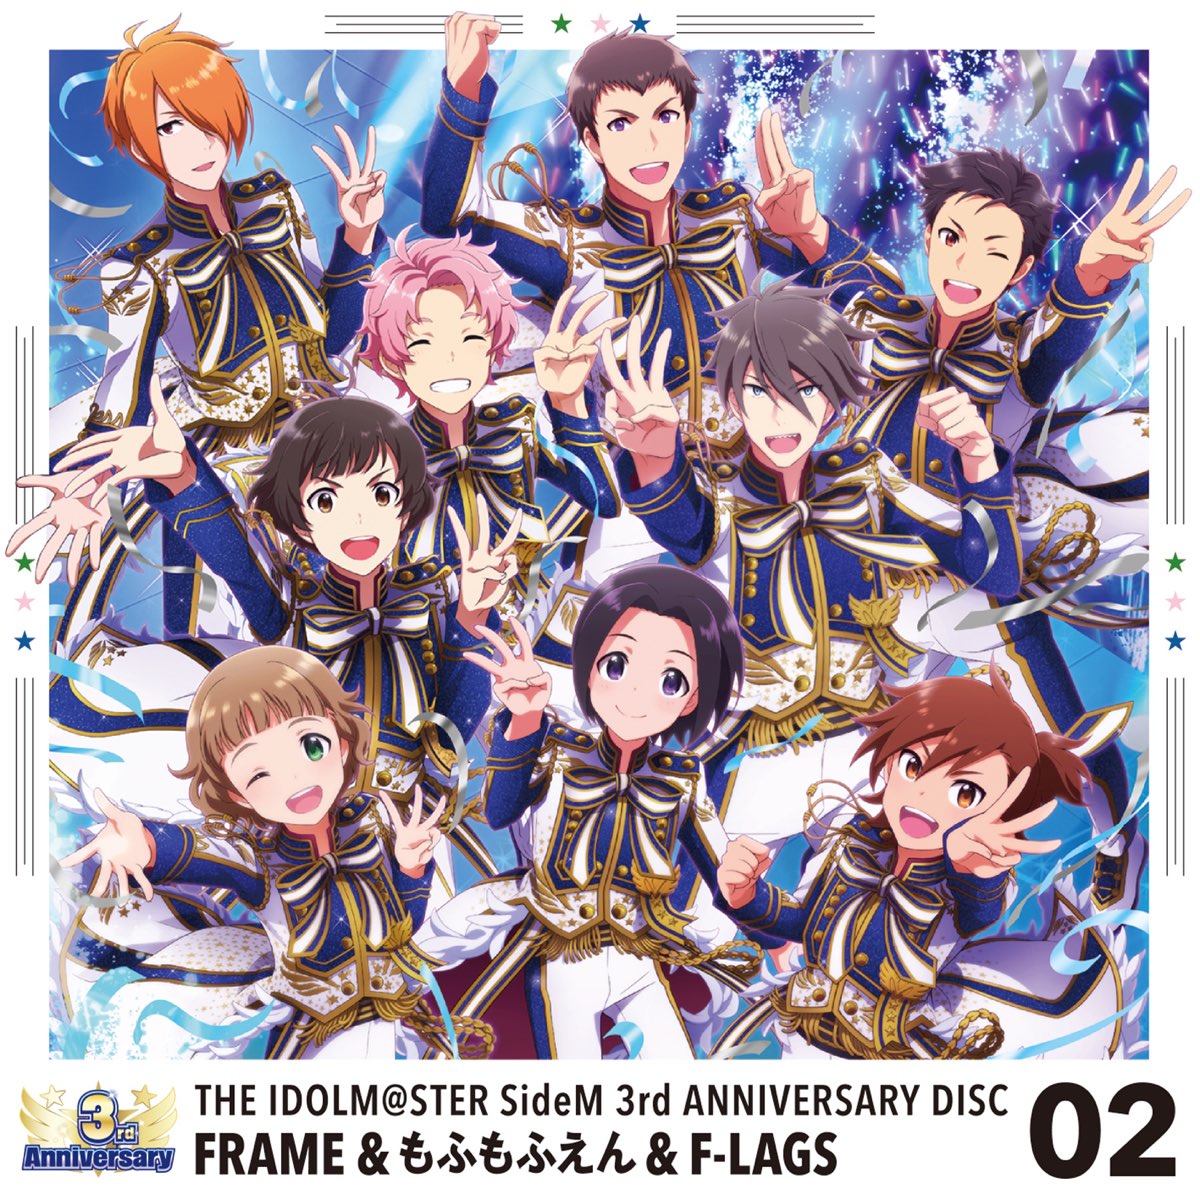 THE IDOLM@STER SideM 3rd ANNIVERSARY 02 - EP - Album by FRAME 